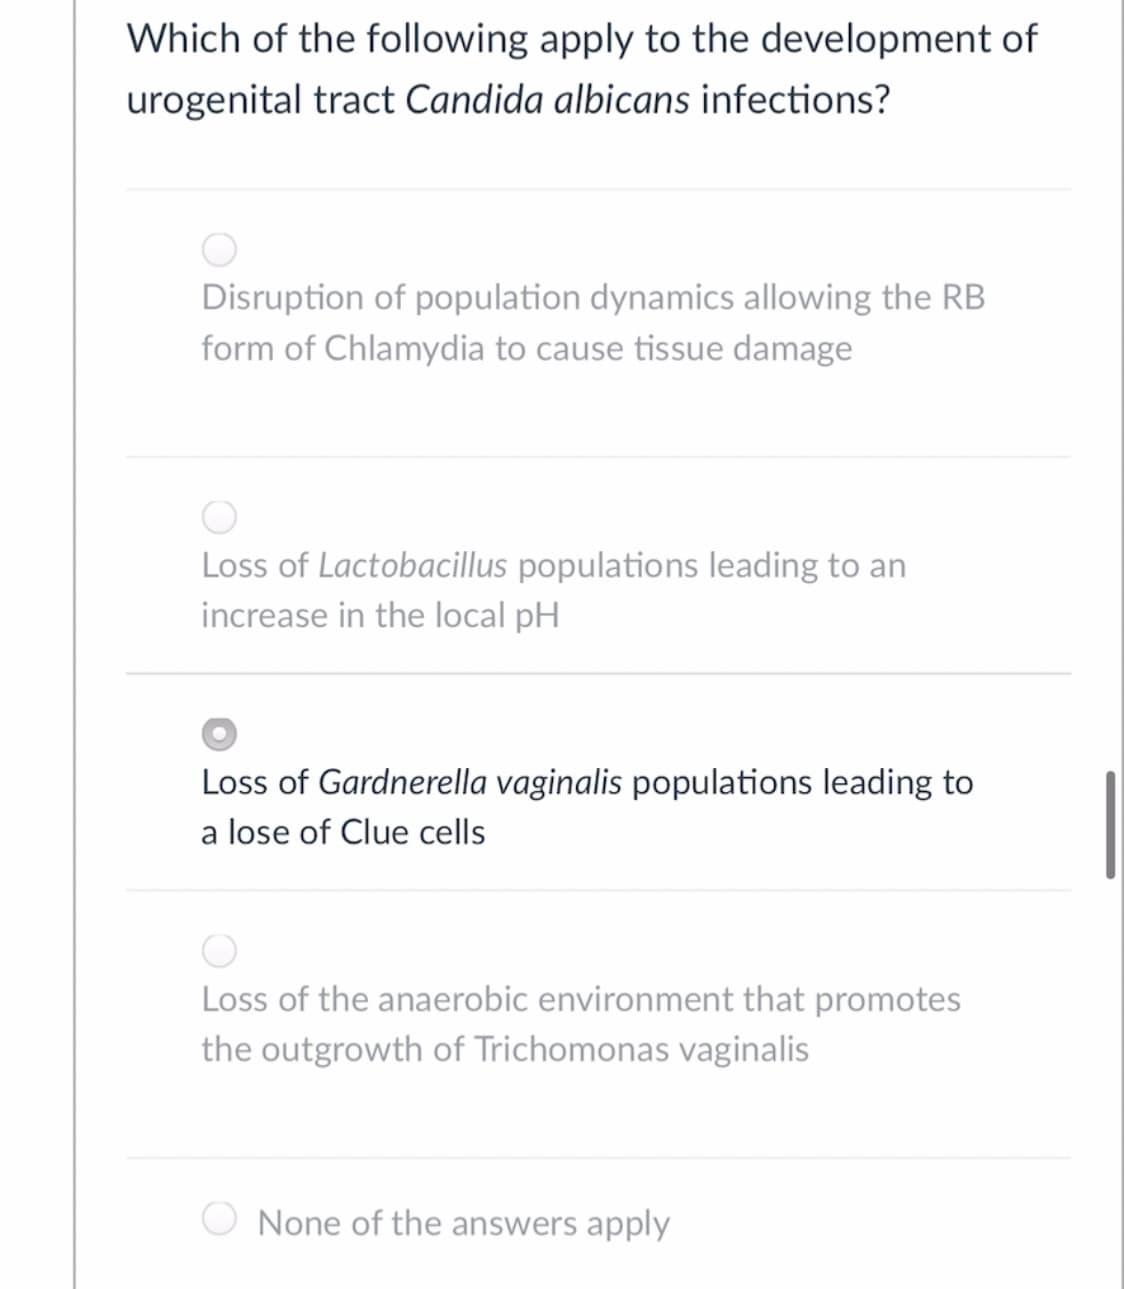 Which of the following apply to the development of
urogenital tract Candida albicans infections?
Disruption of population dynamics allowing the RB
form of Chlamydia to cause tissue damage
Loss of Lactobacillus populations leading to an
increase in the local pH
Loss of Gardnerella vaginalis populations leading to
a lose of Clue cells
Loss of the anaerobic environment that promotes
the outgrowth of Trichomonas vaginalis
None of the answers apply
